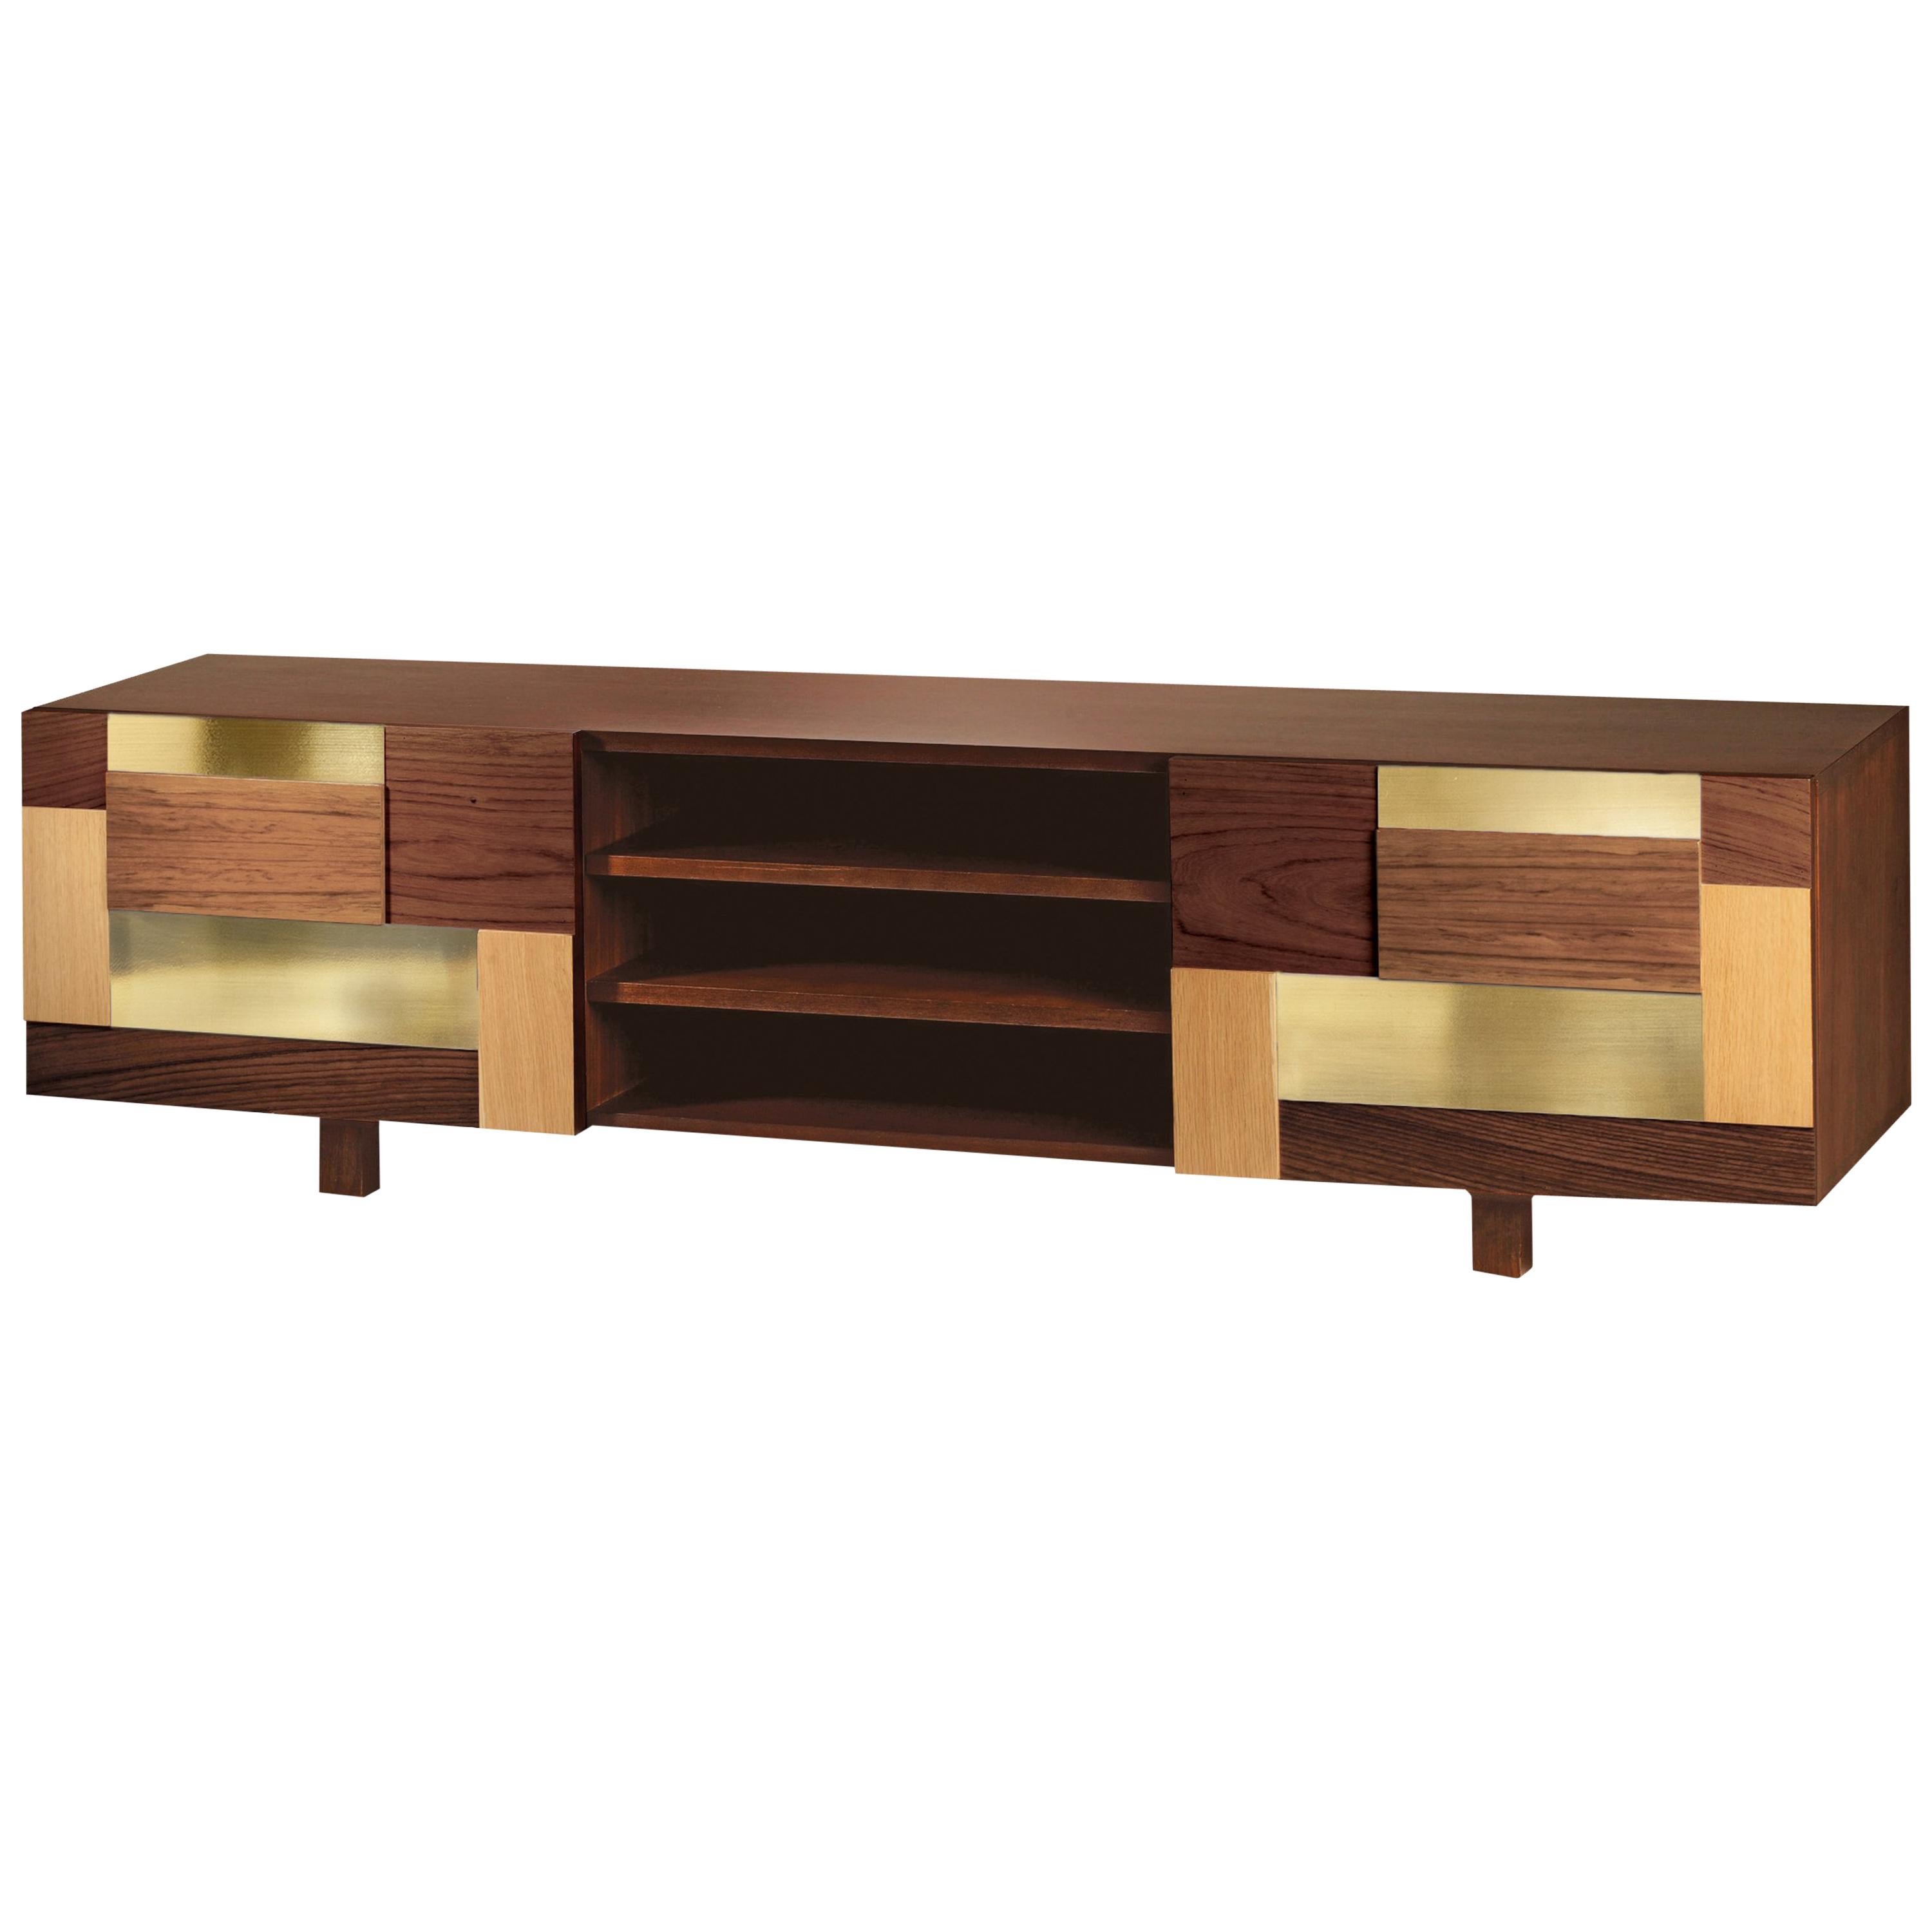 Tv Stand Form in Natural Walnut Wood and Polished Brass Details For Sale